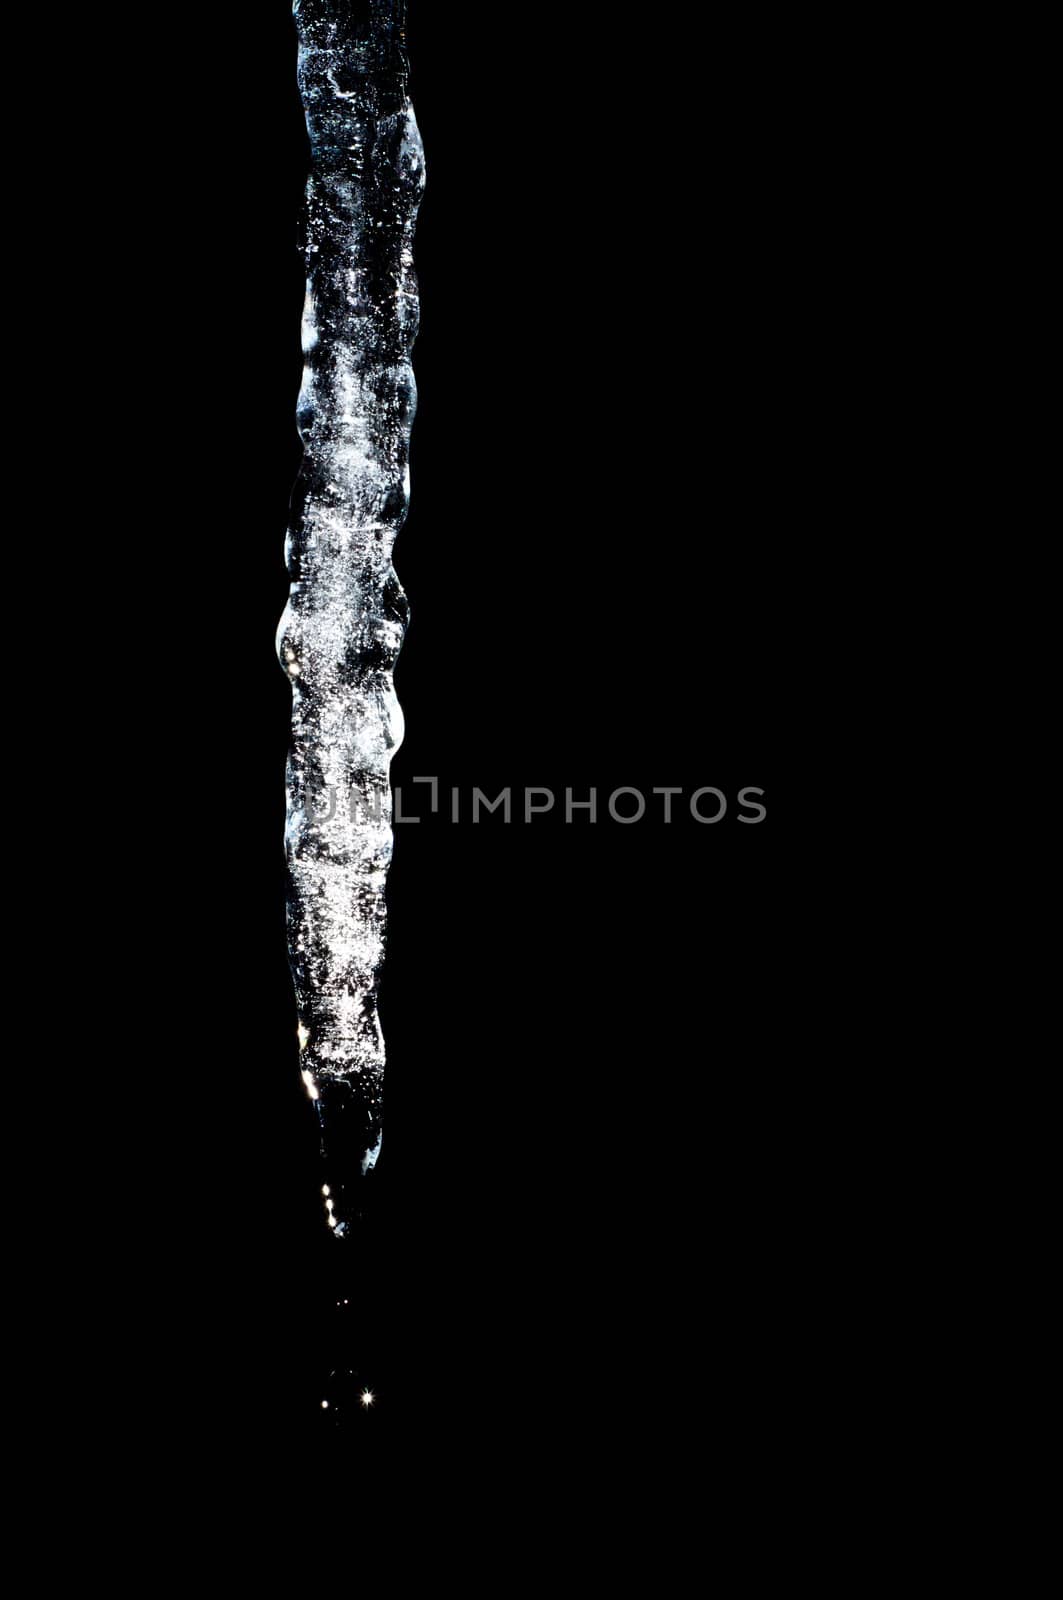 Dripping Icicle by shalomyoseph